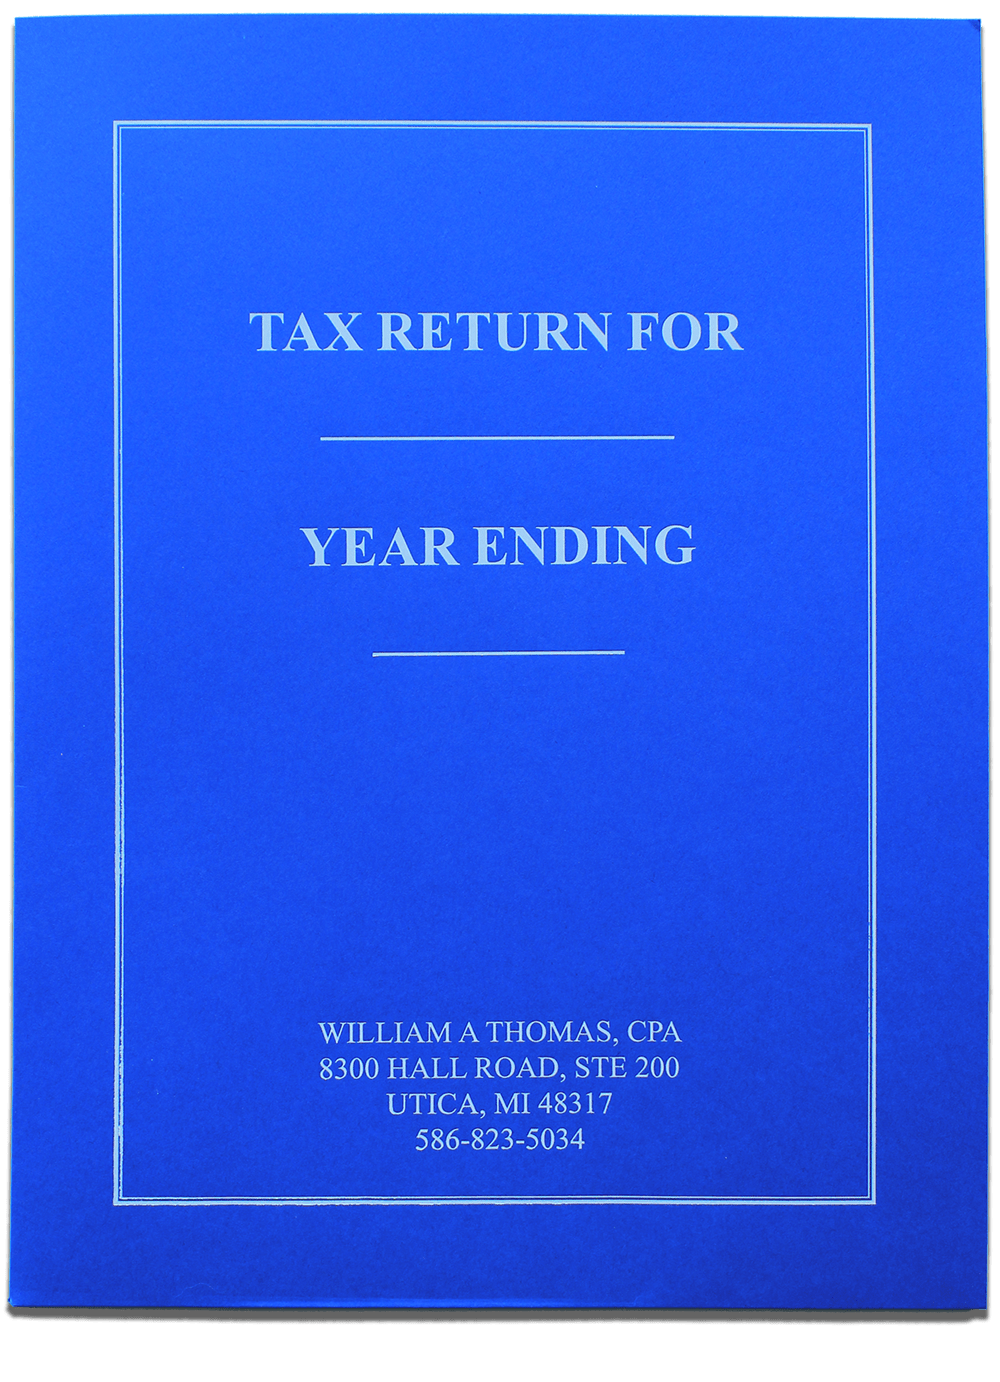 Custom Personalized Tax Folder on Cobalt Blue Paper with White Foil Stamping - DiscountTaxForms.com